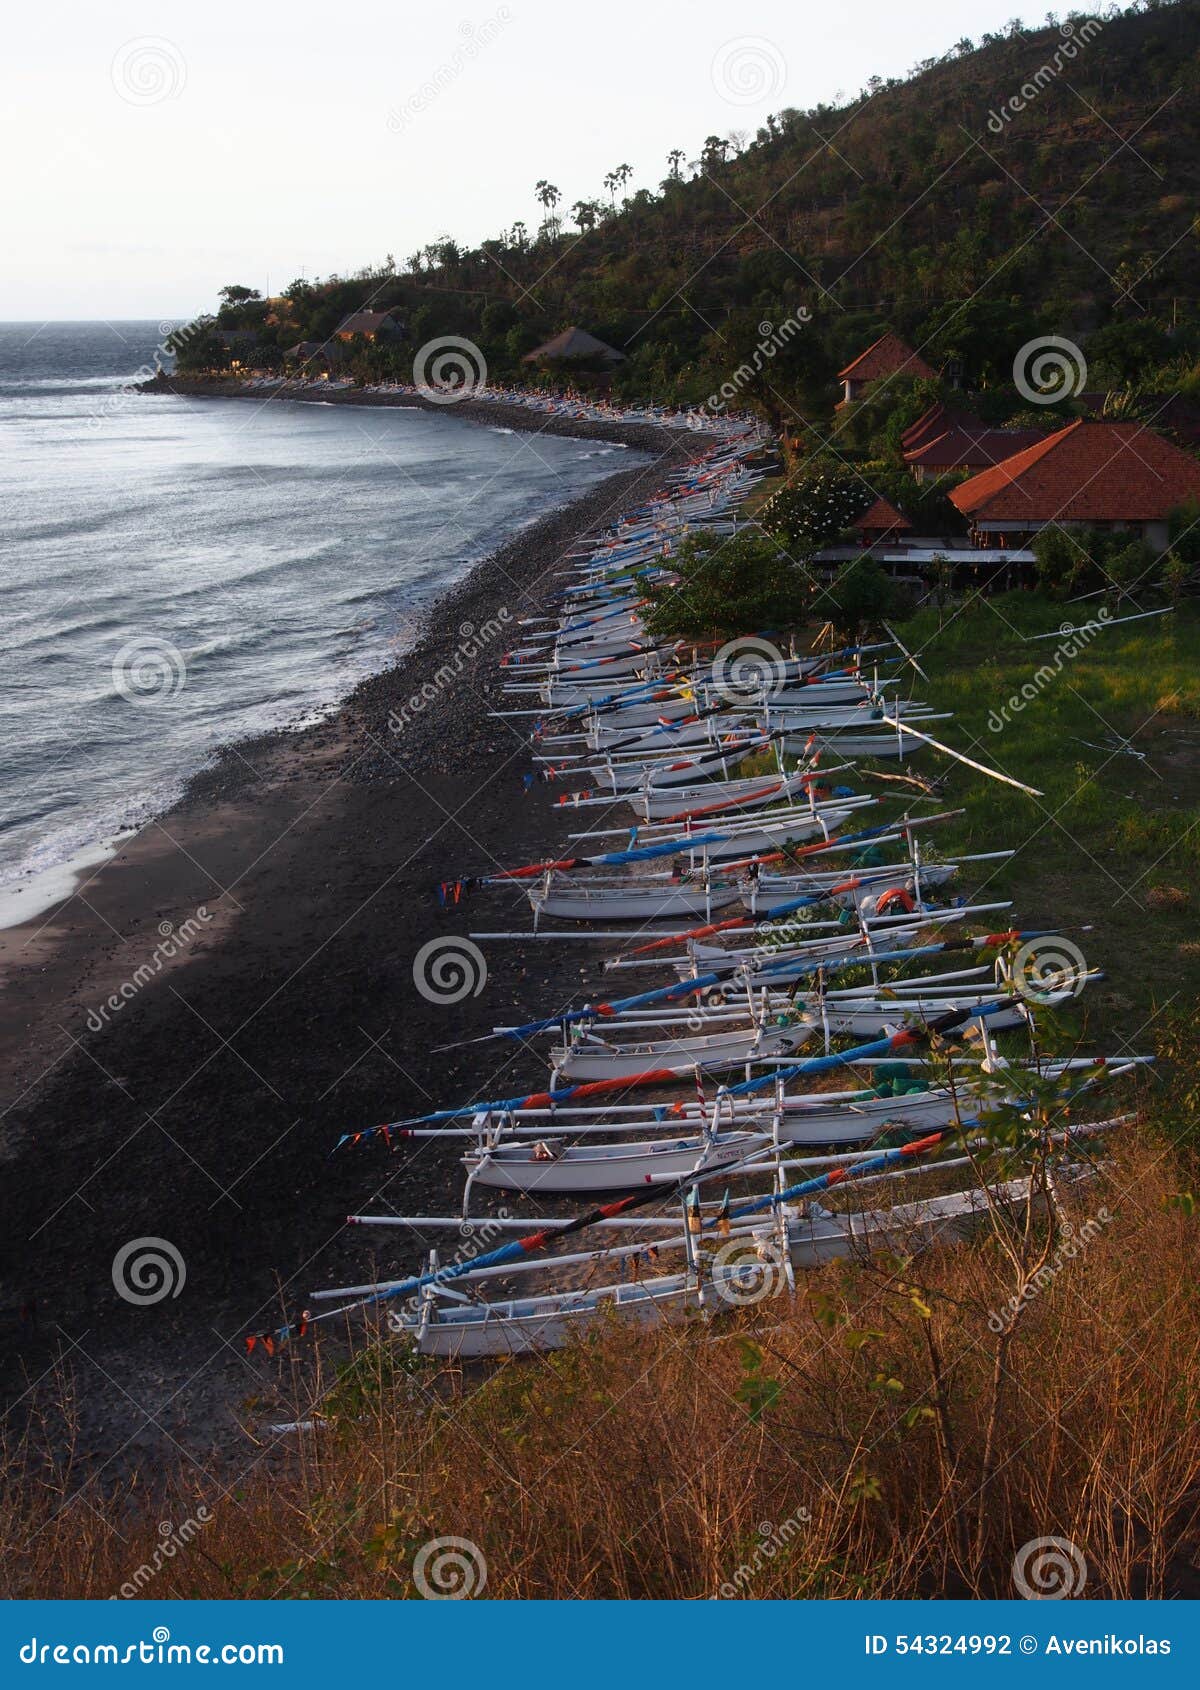 parked fishing boats on the beach, amed, bali